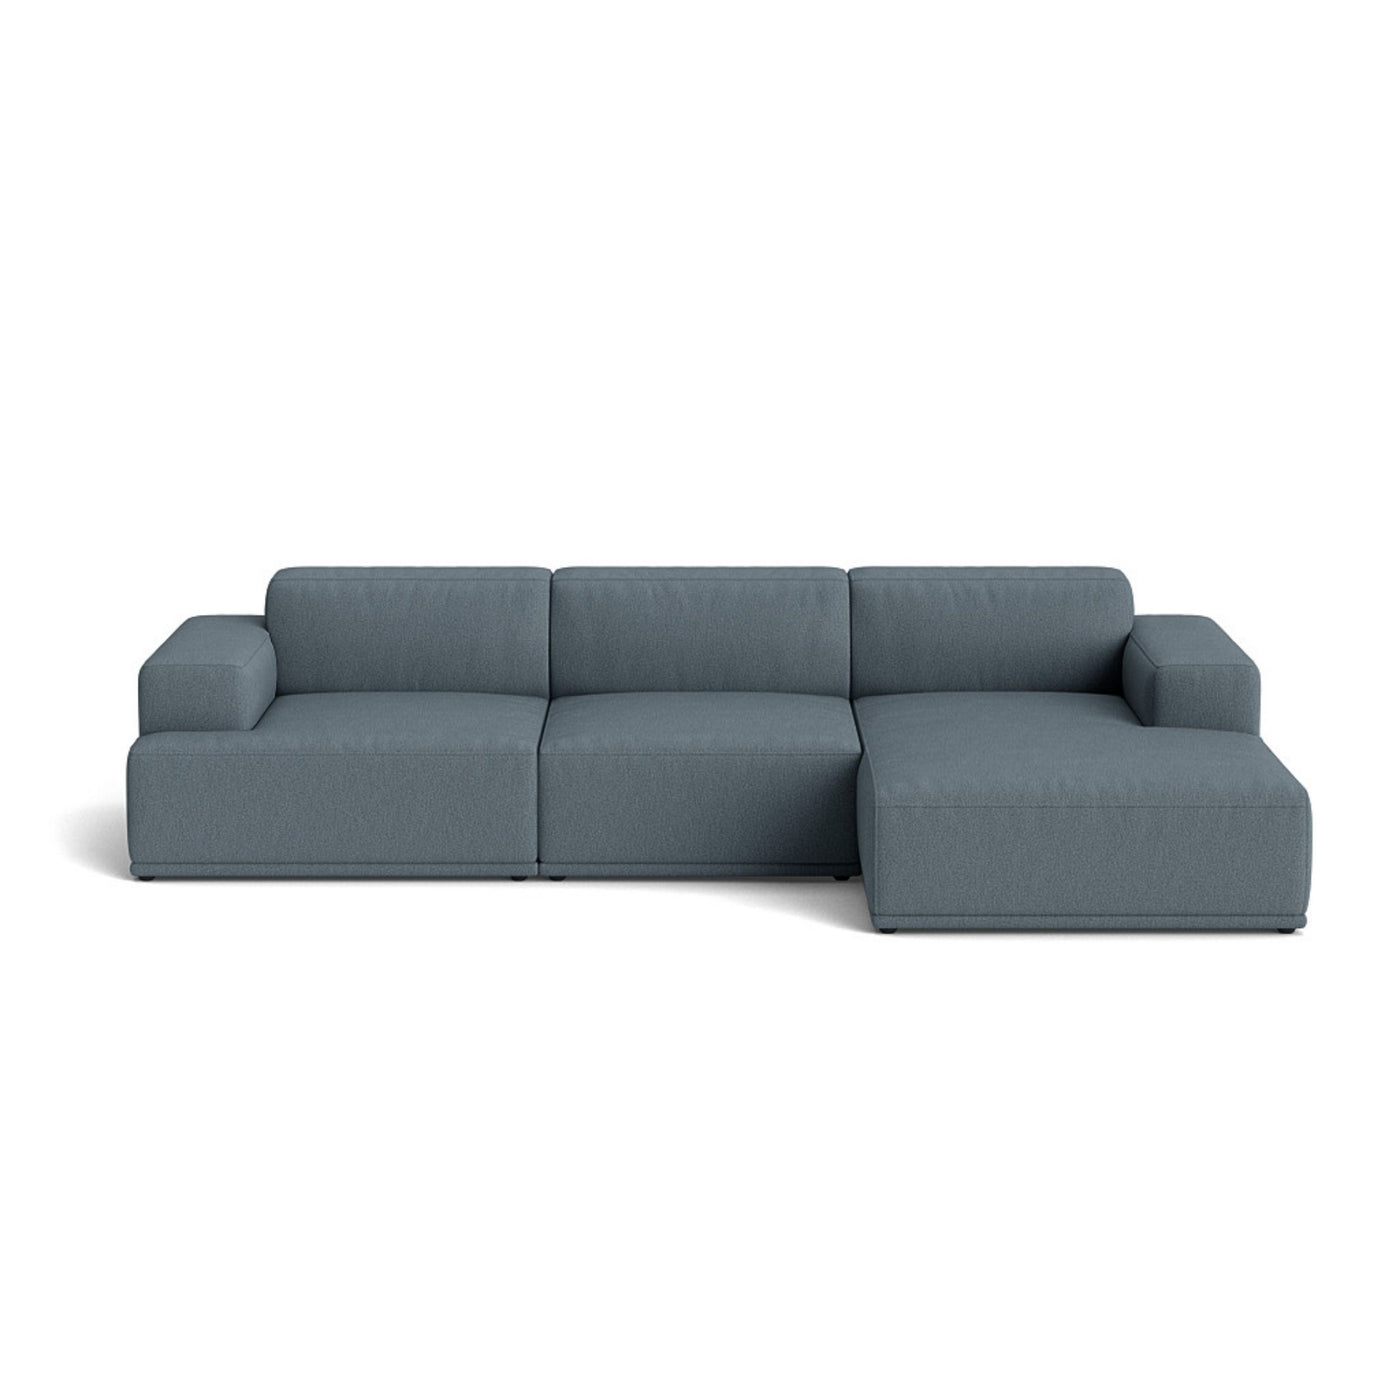 Muuto Connect Soft Modular 3 Seater Sofa, configuration 3. Made-to-order from someday designs. #colour_clay-1-blue